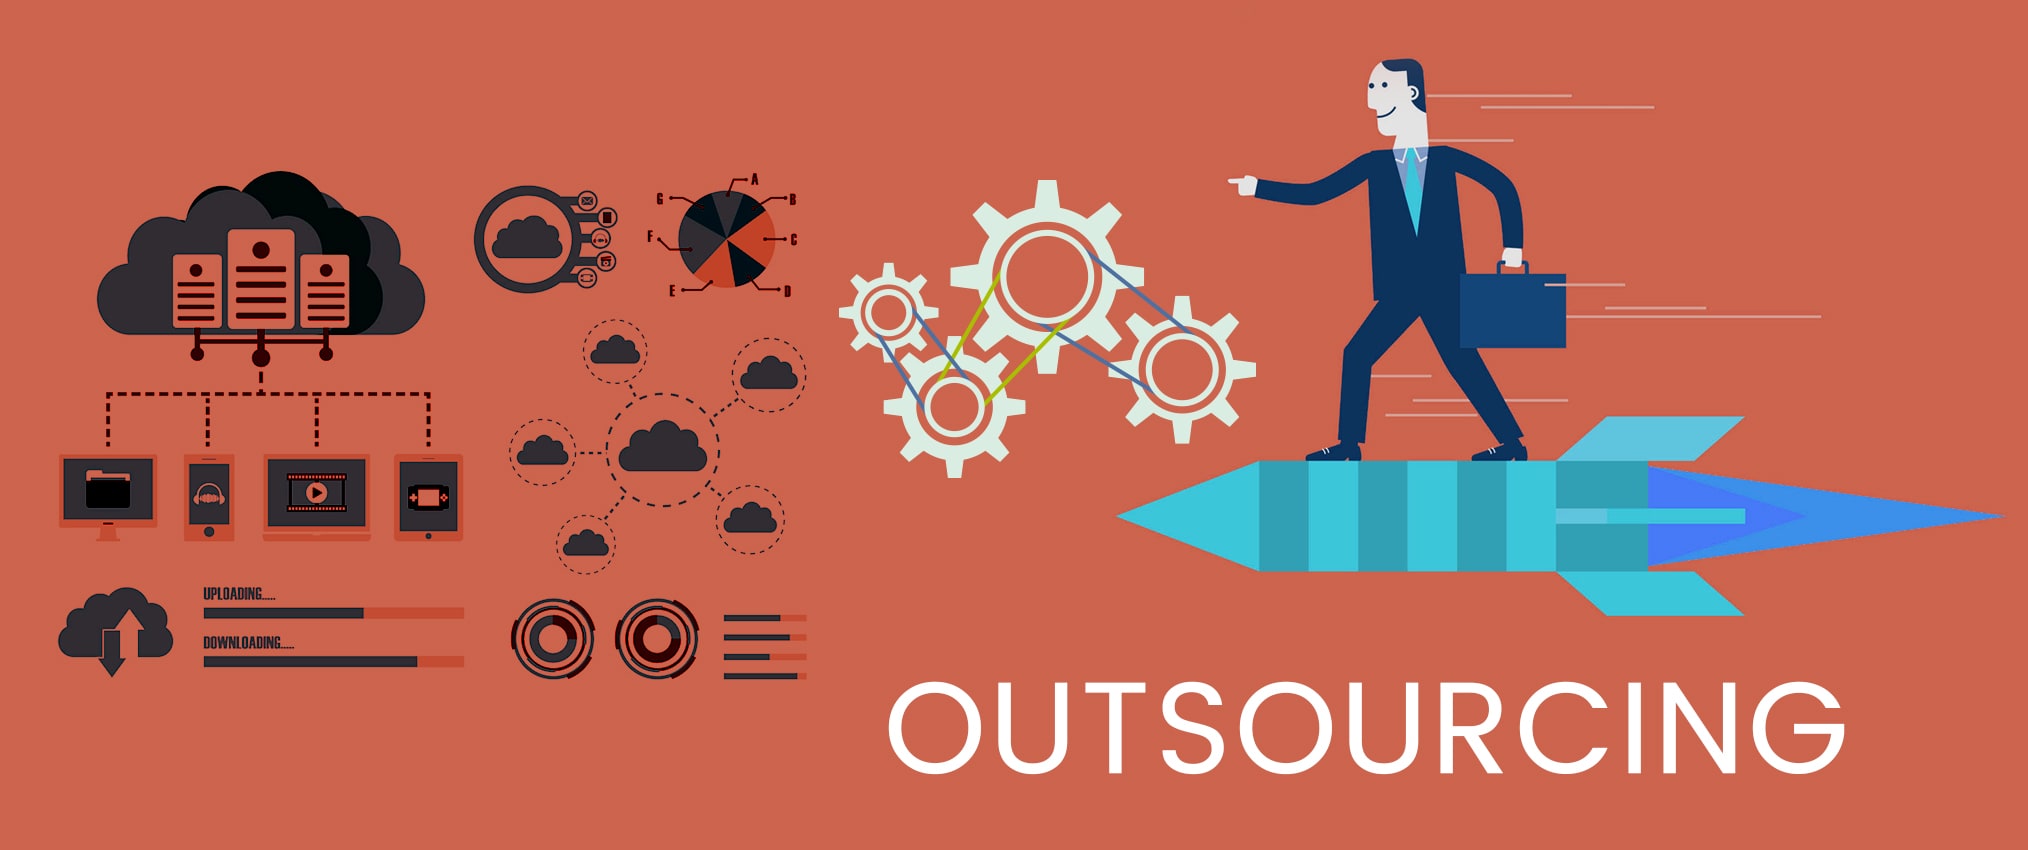 top-5-outsourcing-risks